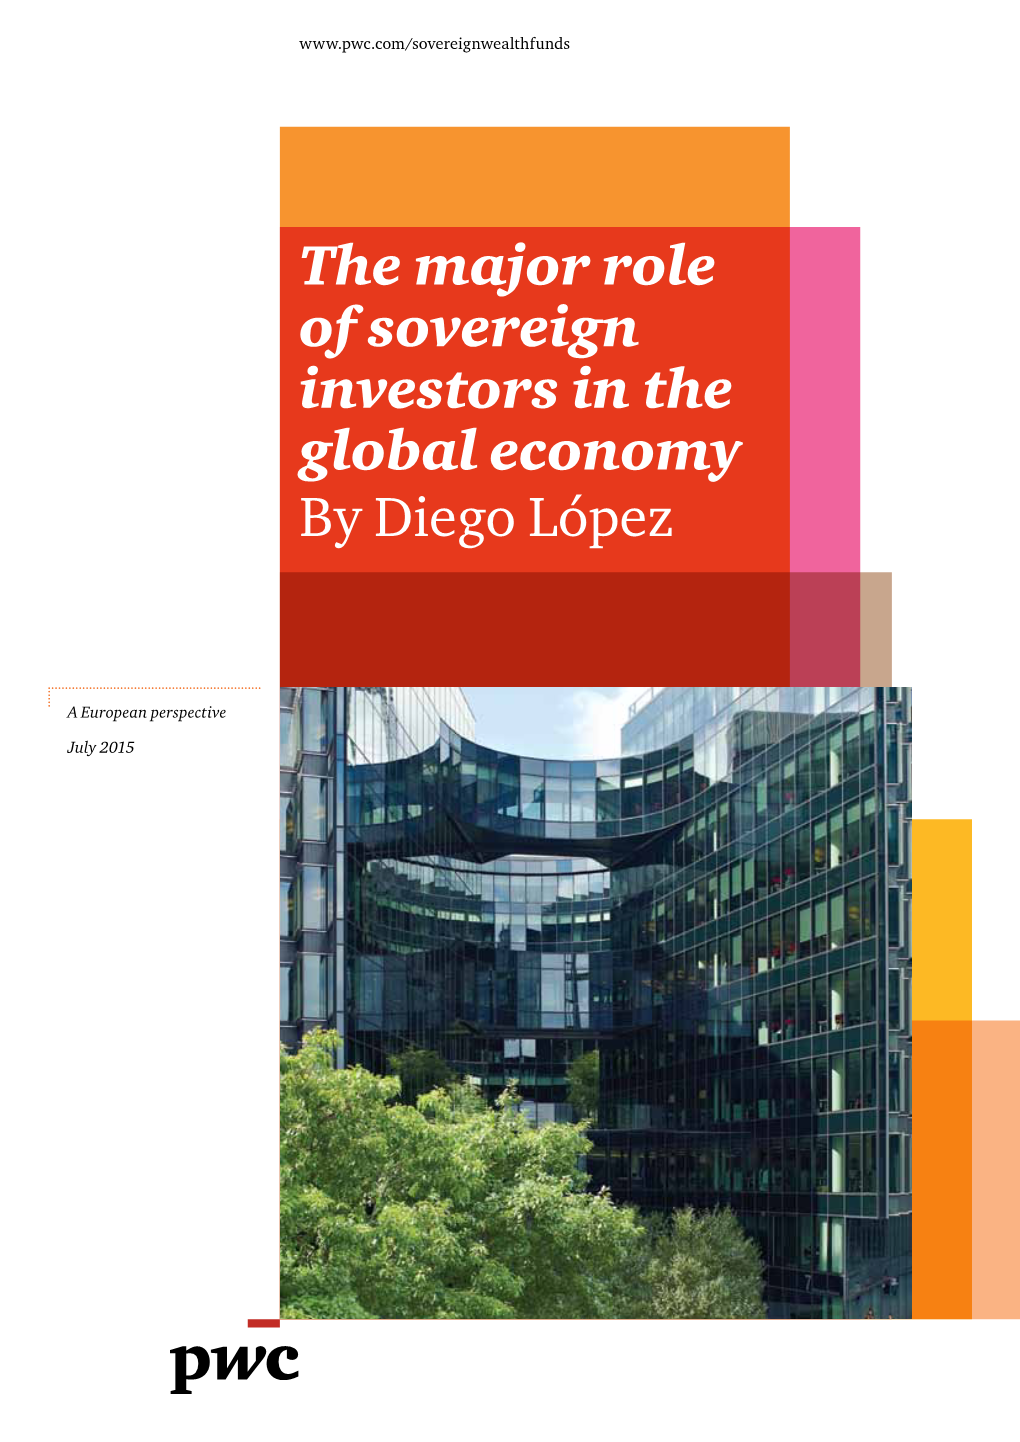 The Major Role of Sovereign Investors in the Global Economy by Diego López